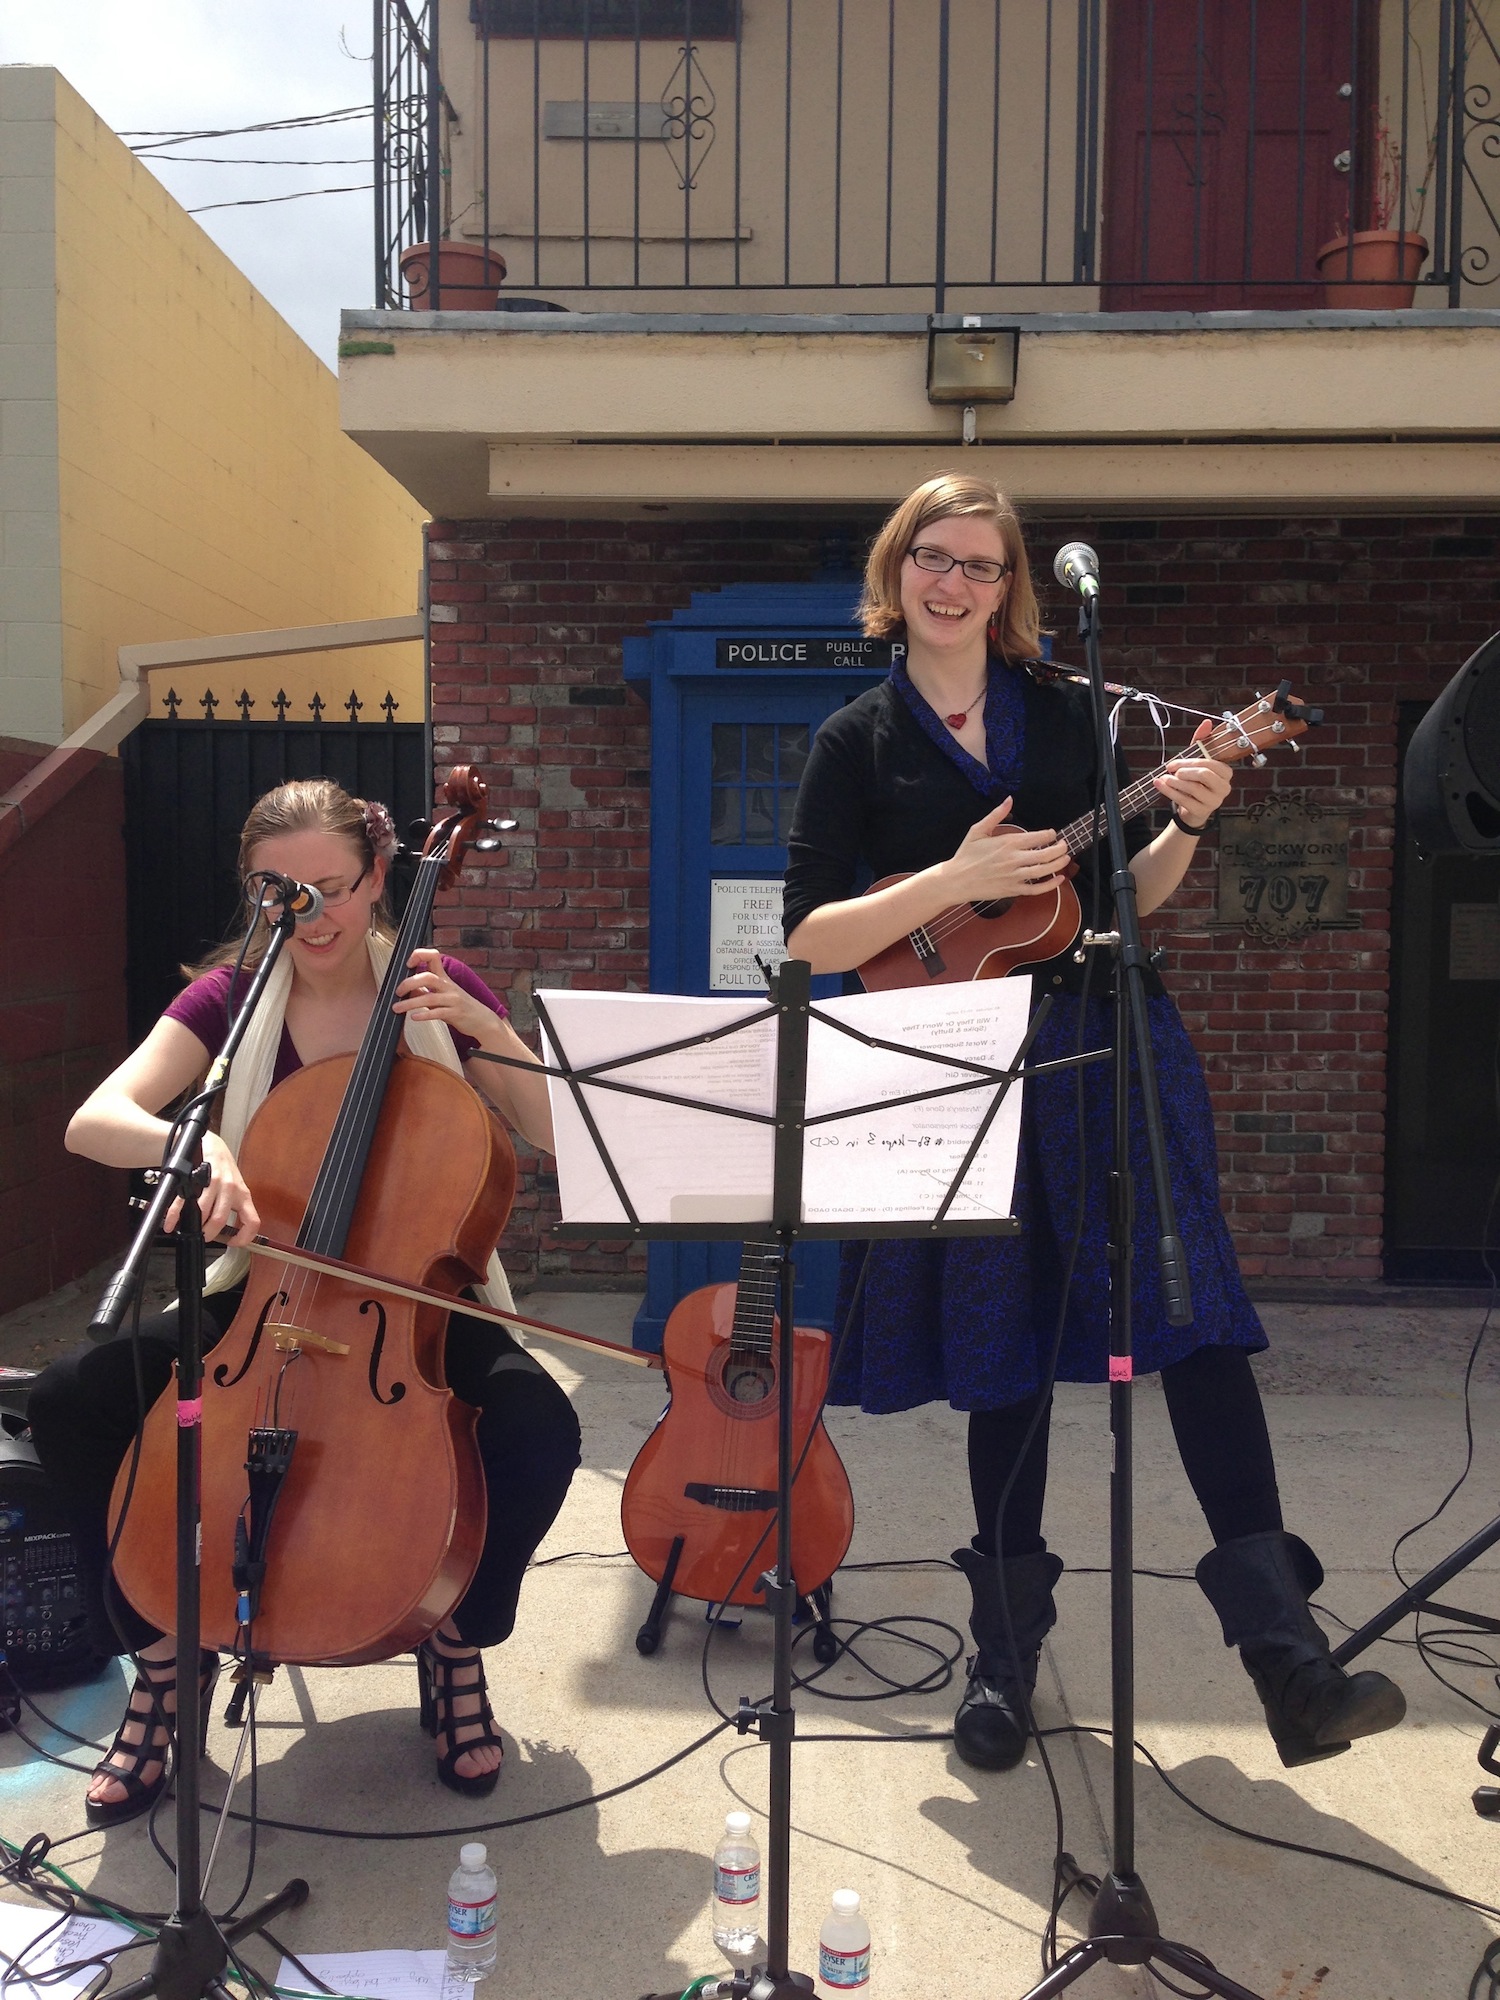 Photo of the Doubleclicks performing outdoors in front of a TARDIS